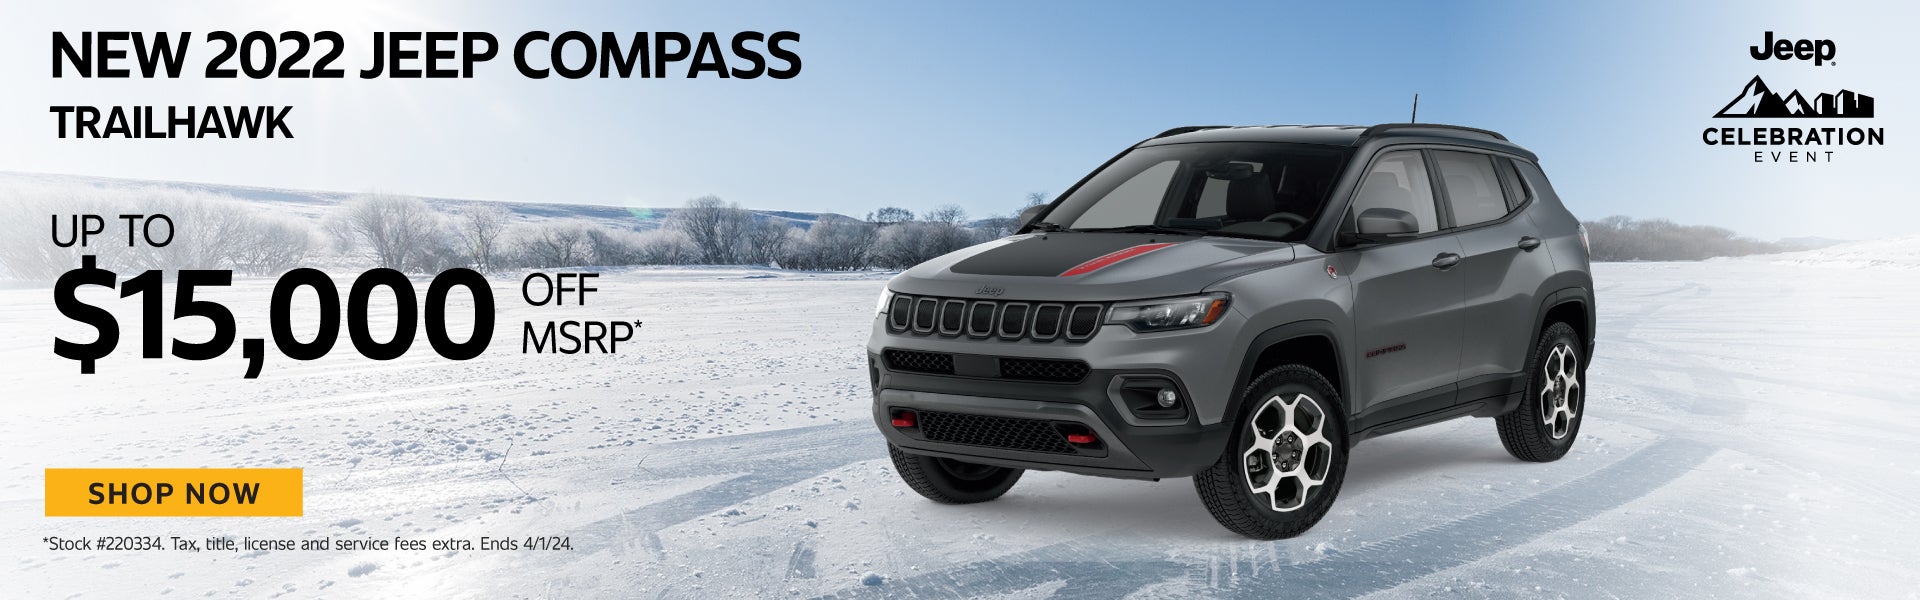 New 2022 Jeep Compass Trailhawk up to $15,000 off MSRP